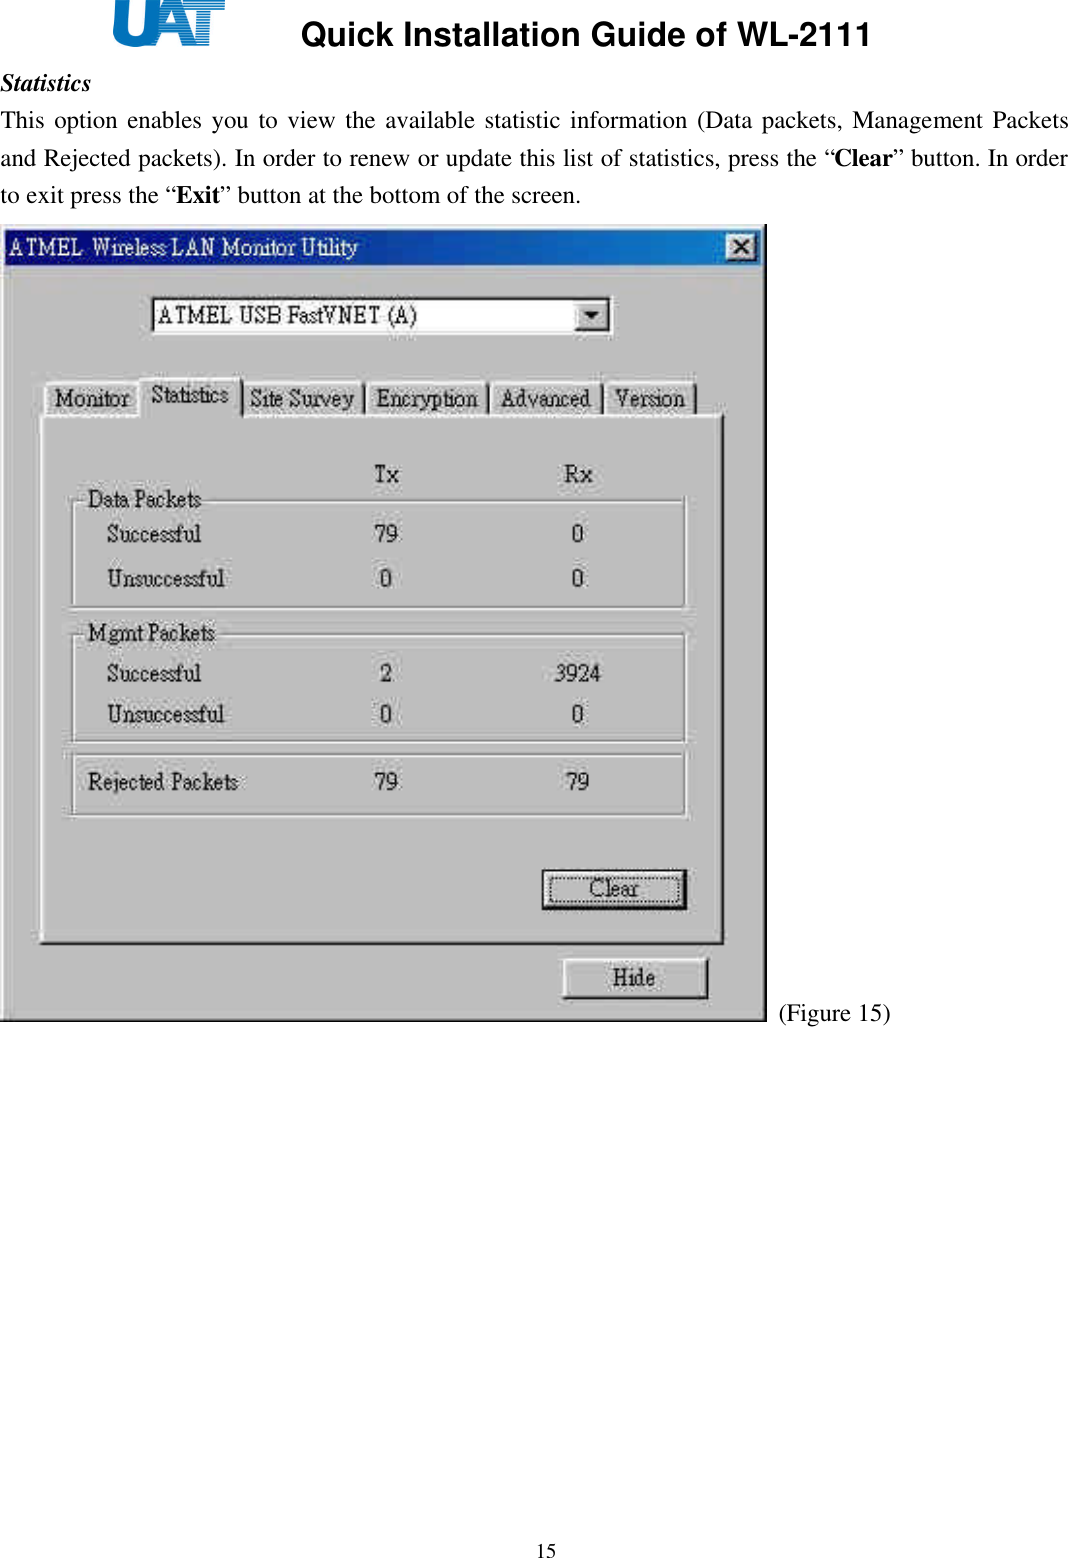     Quick Installation Guide of WL-2111    15Statistics This option enables you to view the available statistic information (Data packets, Management Packets and Rejected packets). In order to renew or update this list of statistics, press the “Clear” button. In order to exit press the “Exit” button at the bottom of the screen.  (Figure 15) 